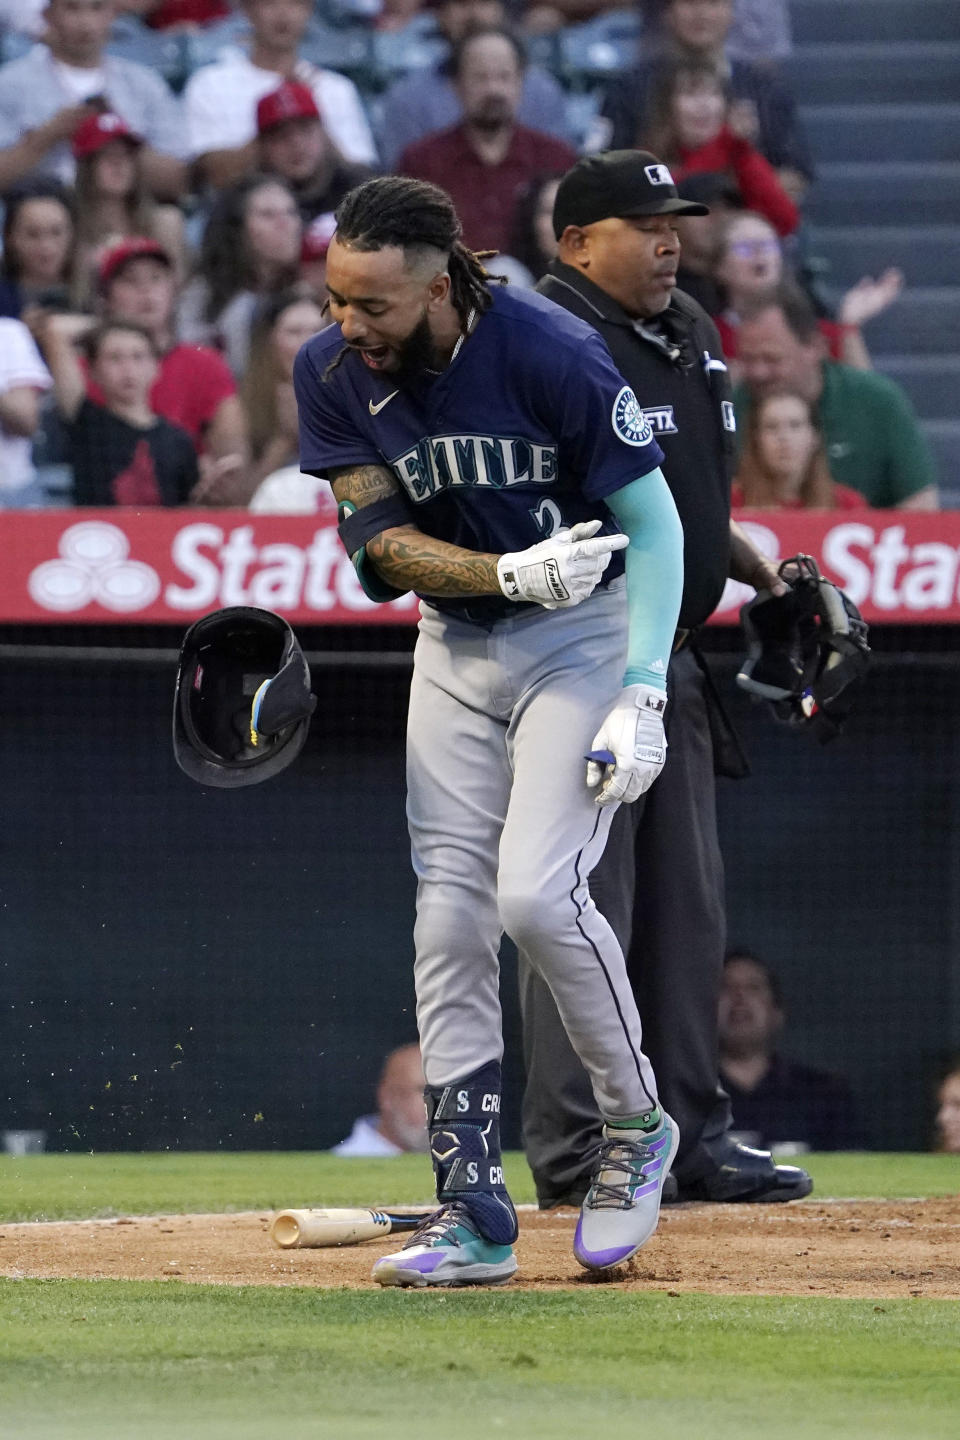 Seattle Mariners' J.P. Crawford, left, reacts after striking out as home plate umpire Adrian Johnson stand behind during the second inning of a baseball game against the Los Angeles Angels Saturday, June 25, 2022, in Anaheim, Calif. (AP Photo/Mark J. Terrill)